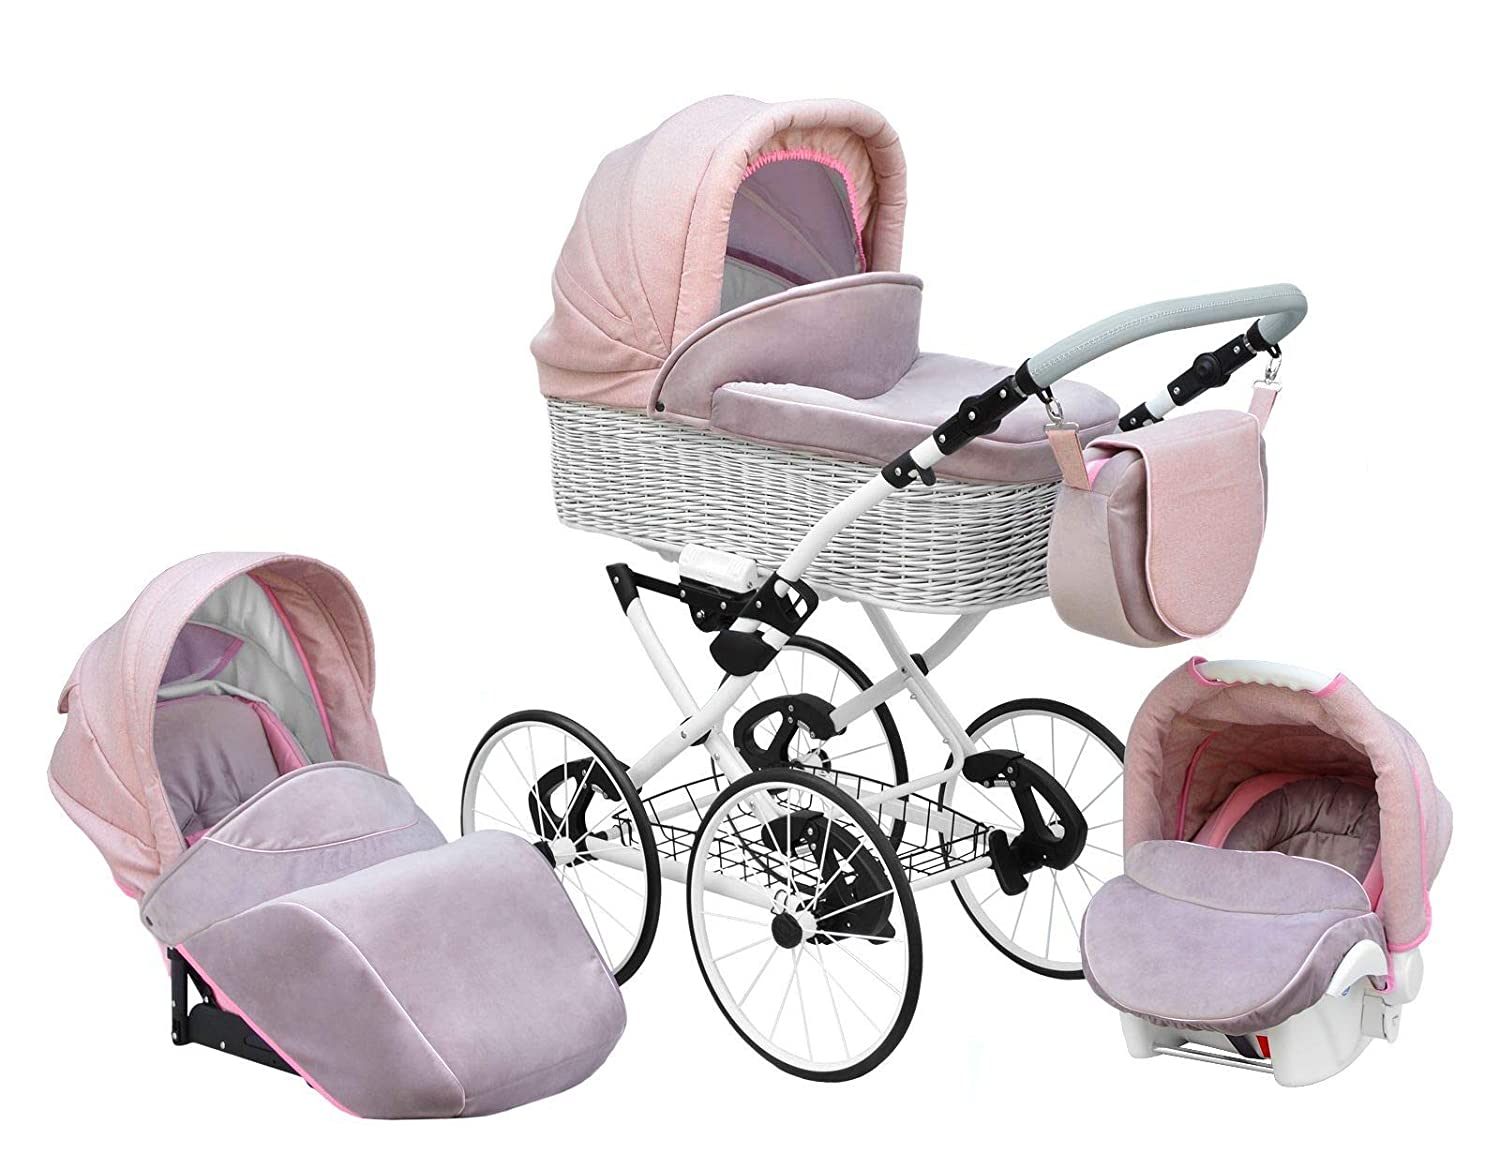 Lux4Kids Retro Pushchair Nature One Pro Puncture Free 27 Inch Spoke Wheels Wicker Basket Powder Kiss 03 2-in-1 without Baby Seat